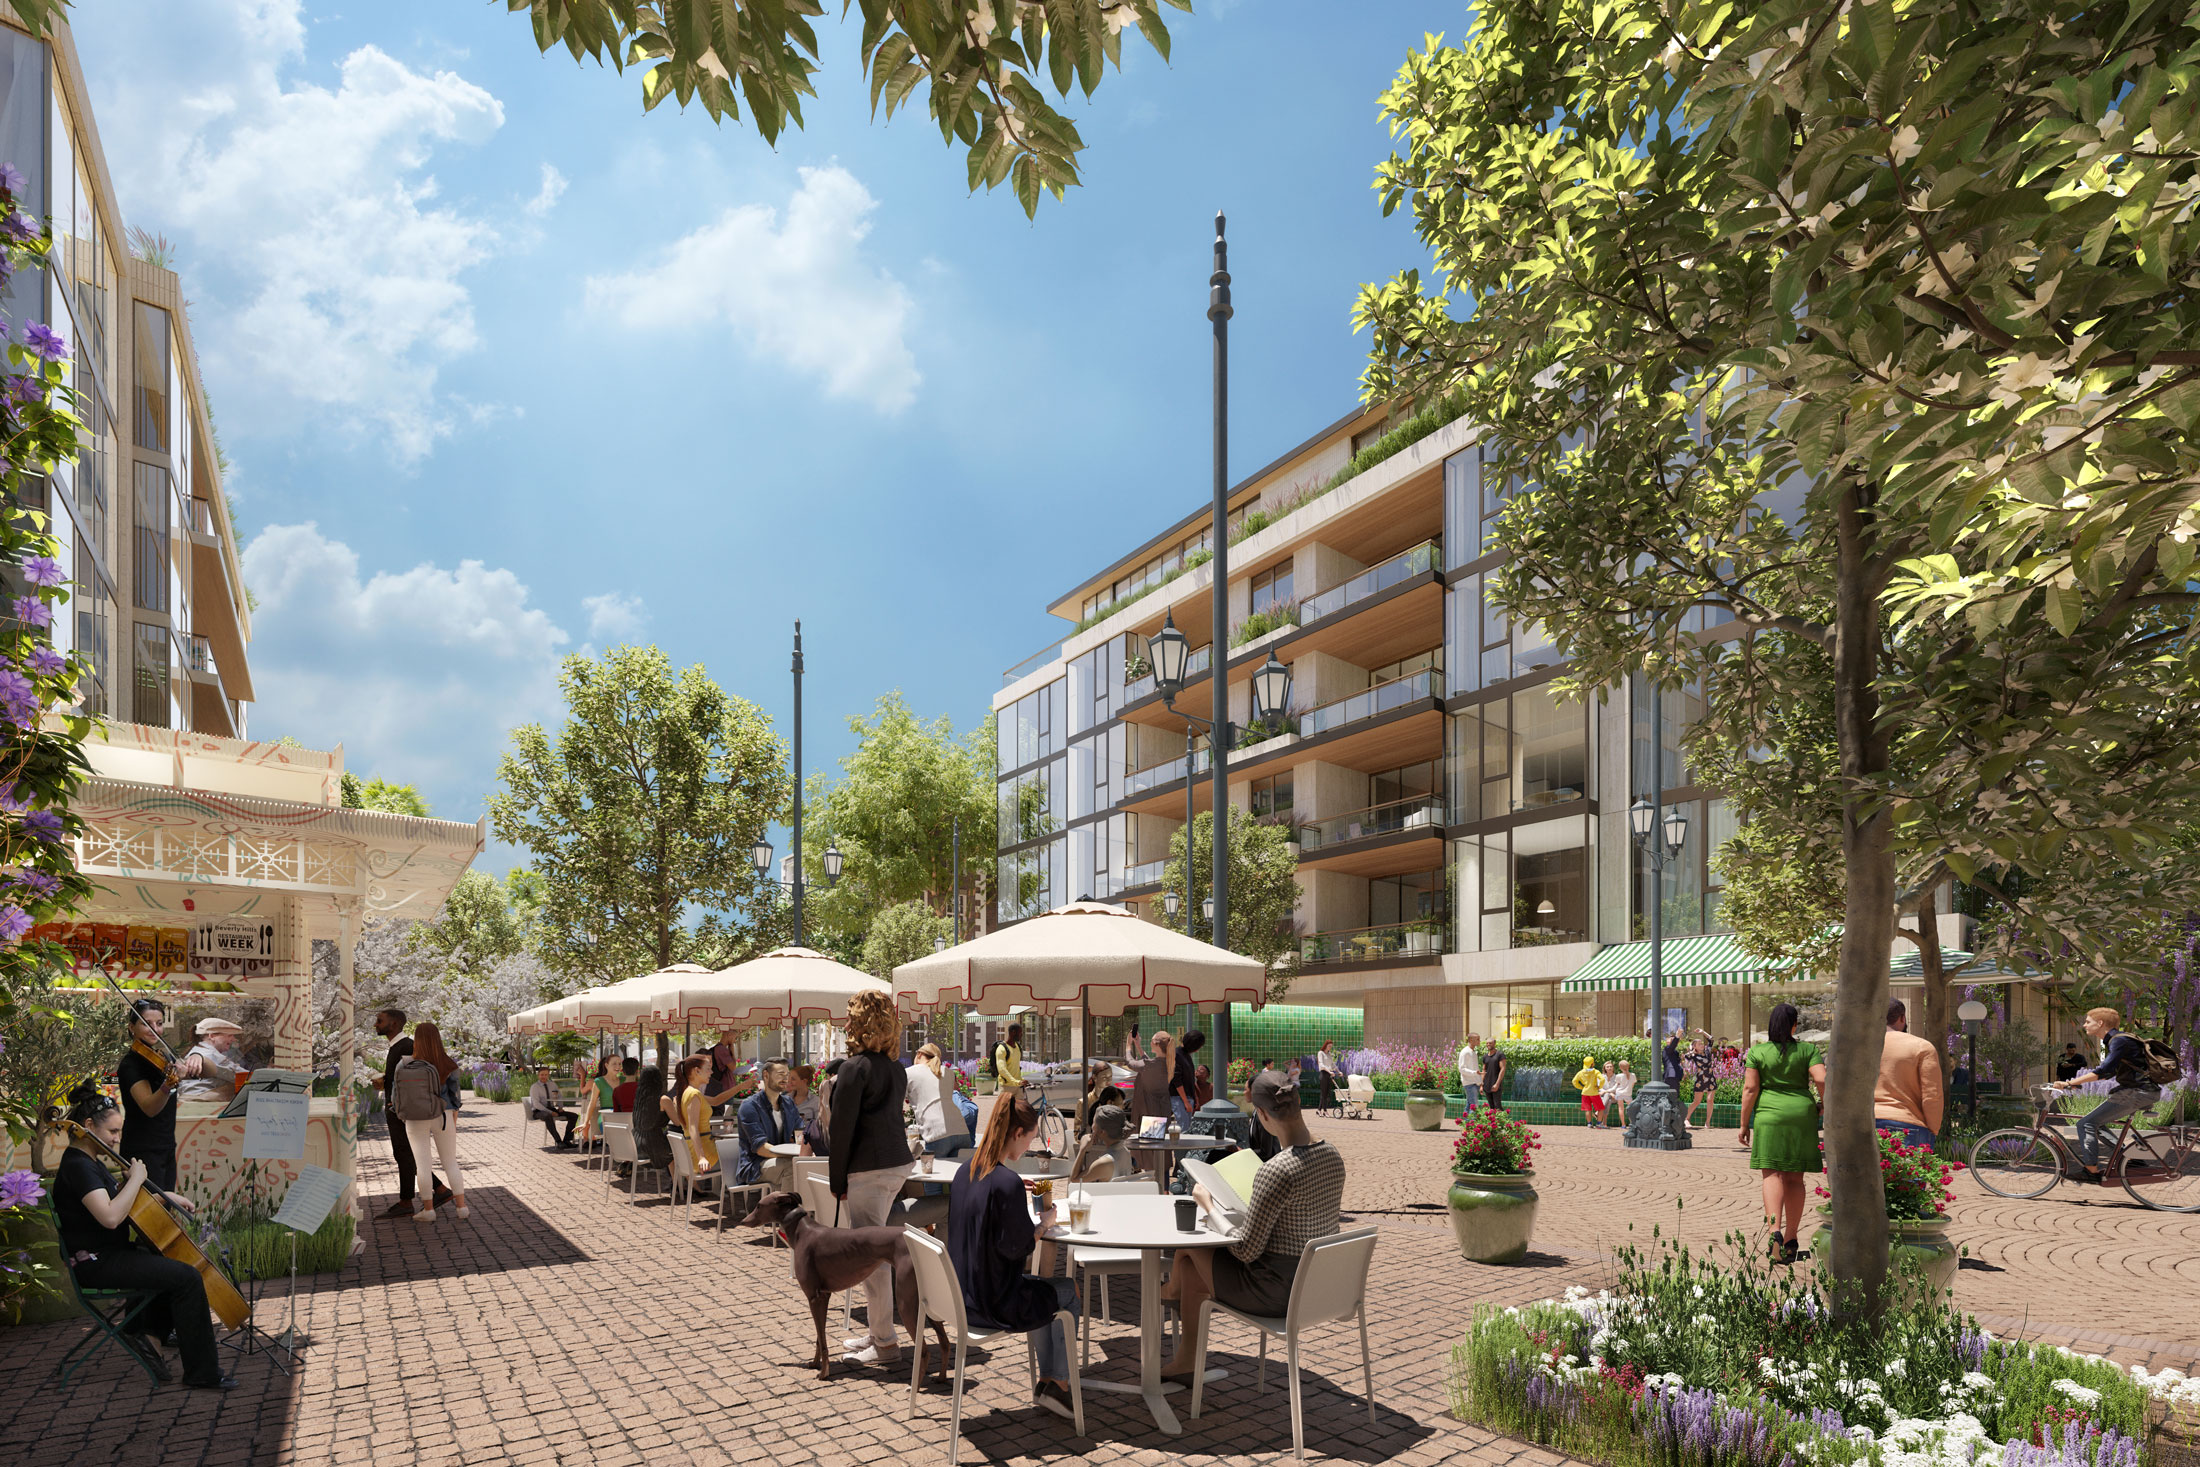 Architectural Rendering of the exterior of the Beverly Hills development project located in Beverly Hills, California